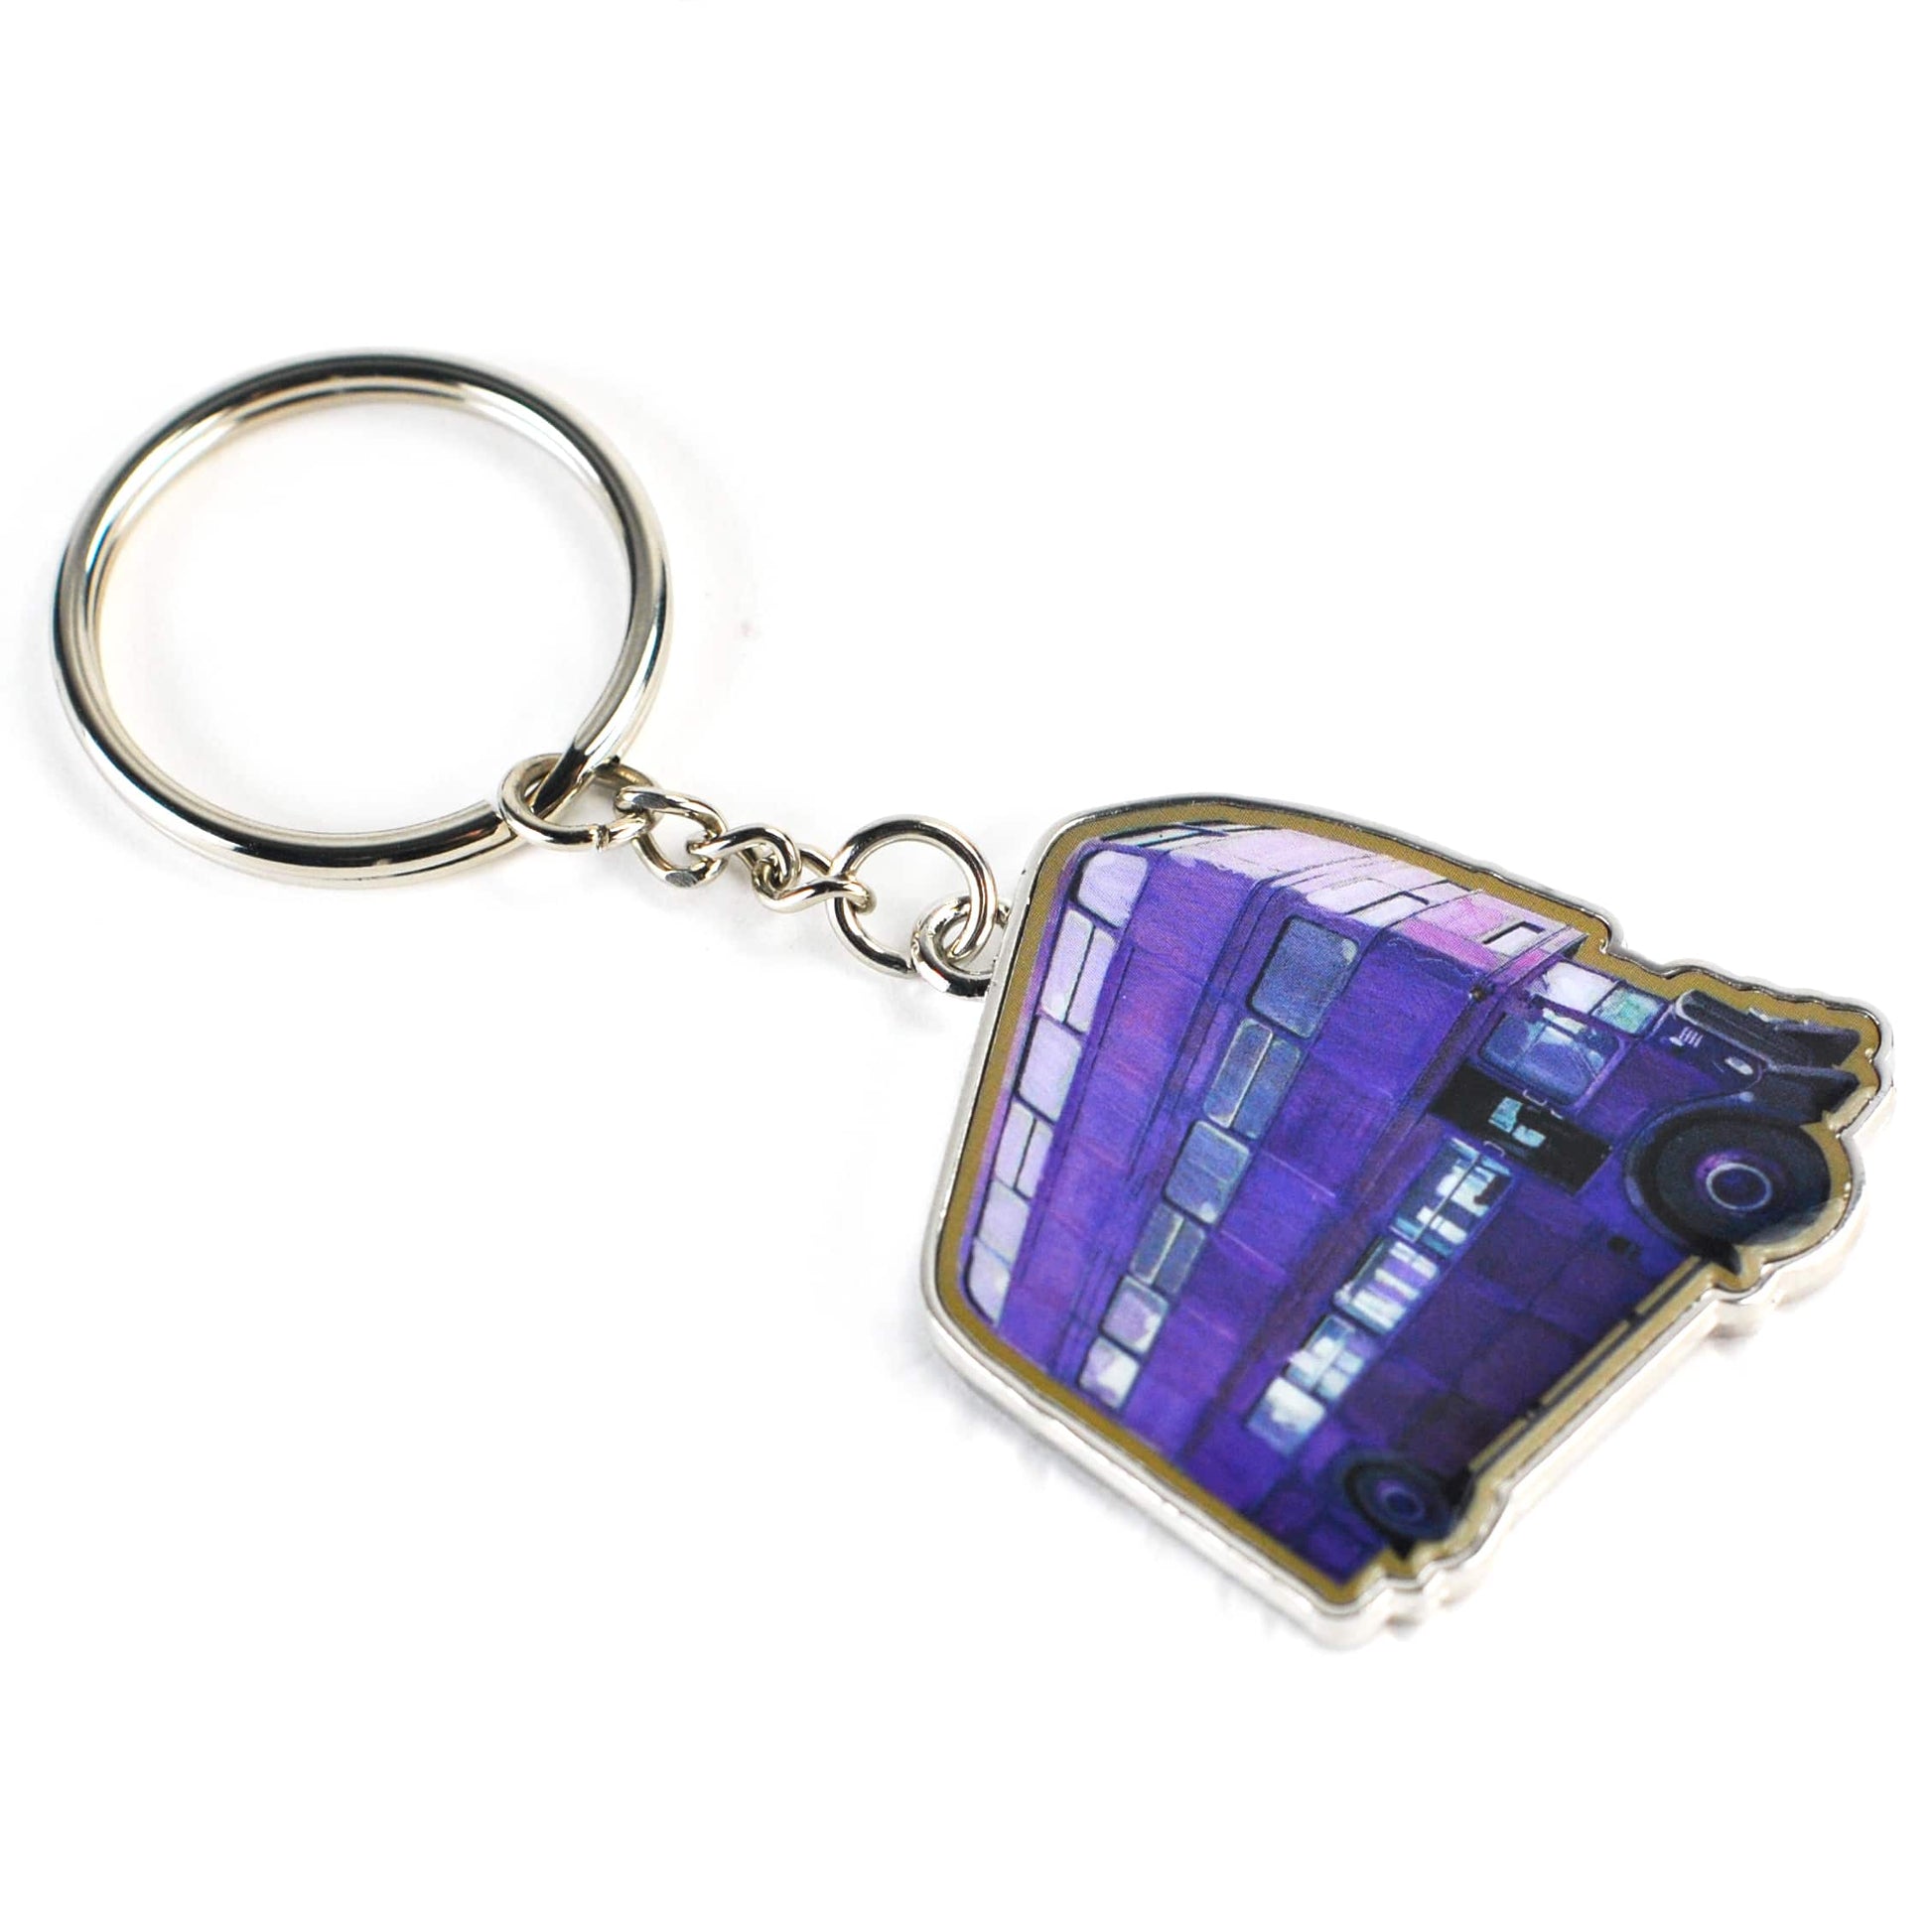 Knight Bus Keyring - Harry Potter Gifts & Merchandise